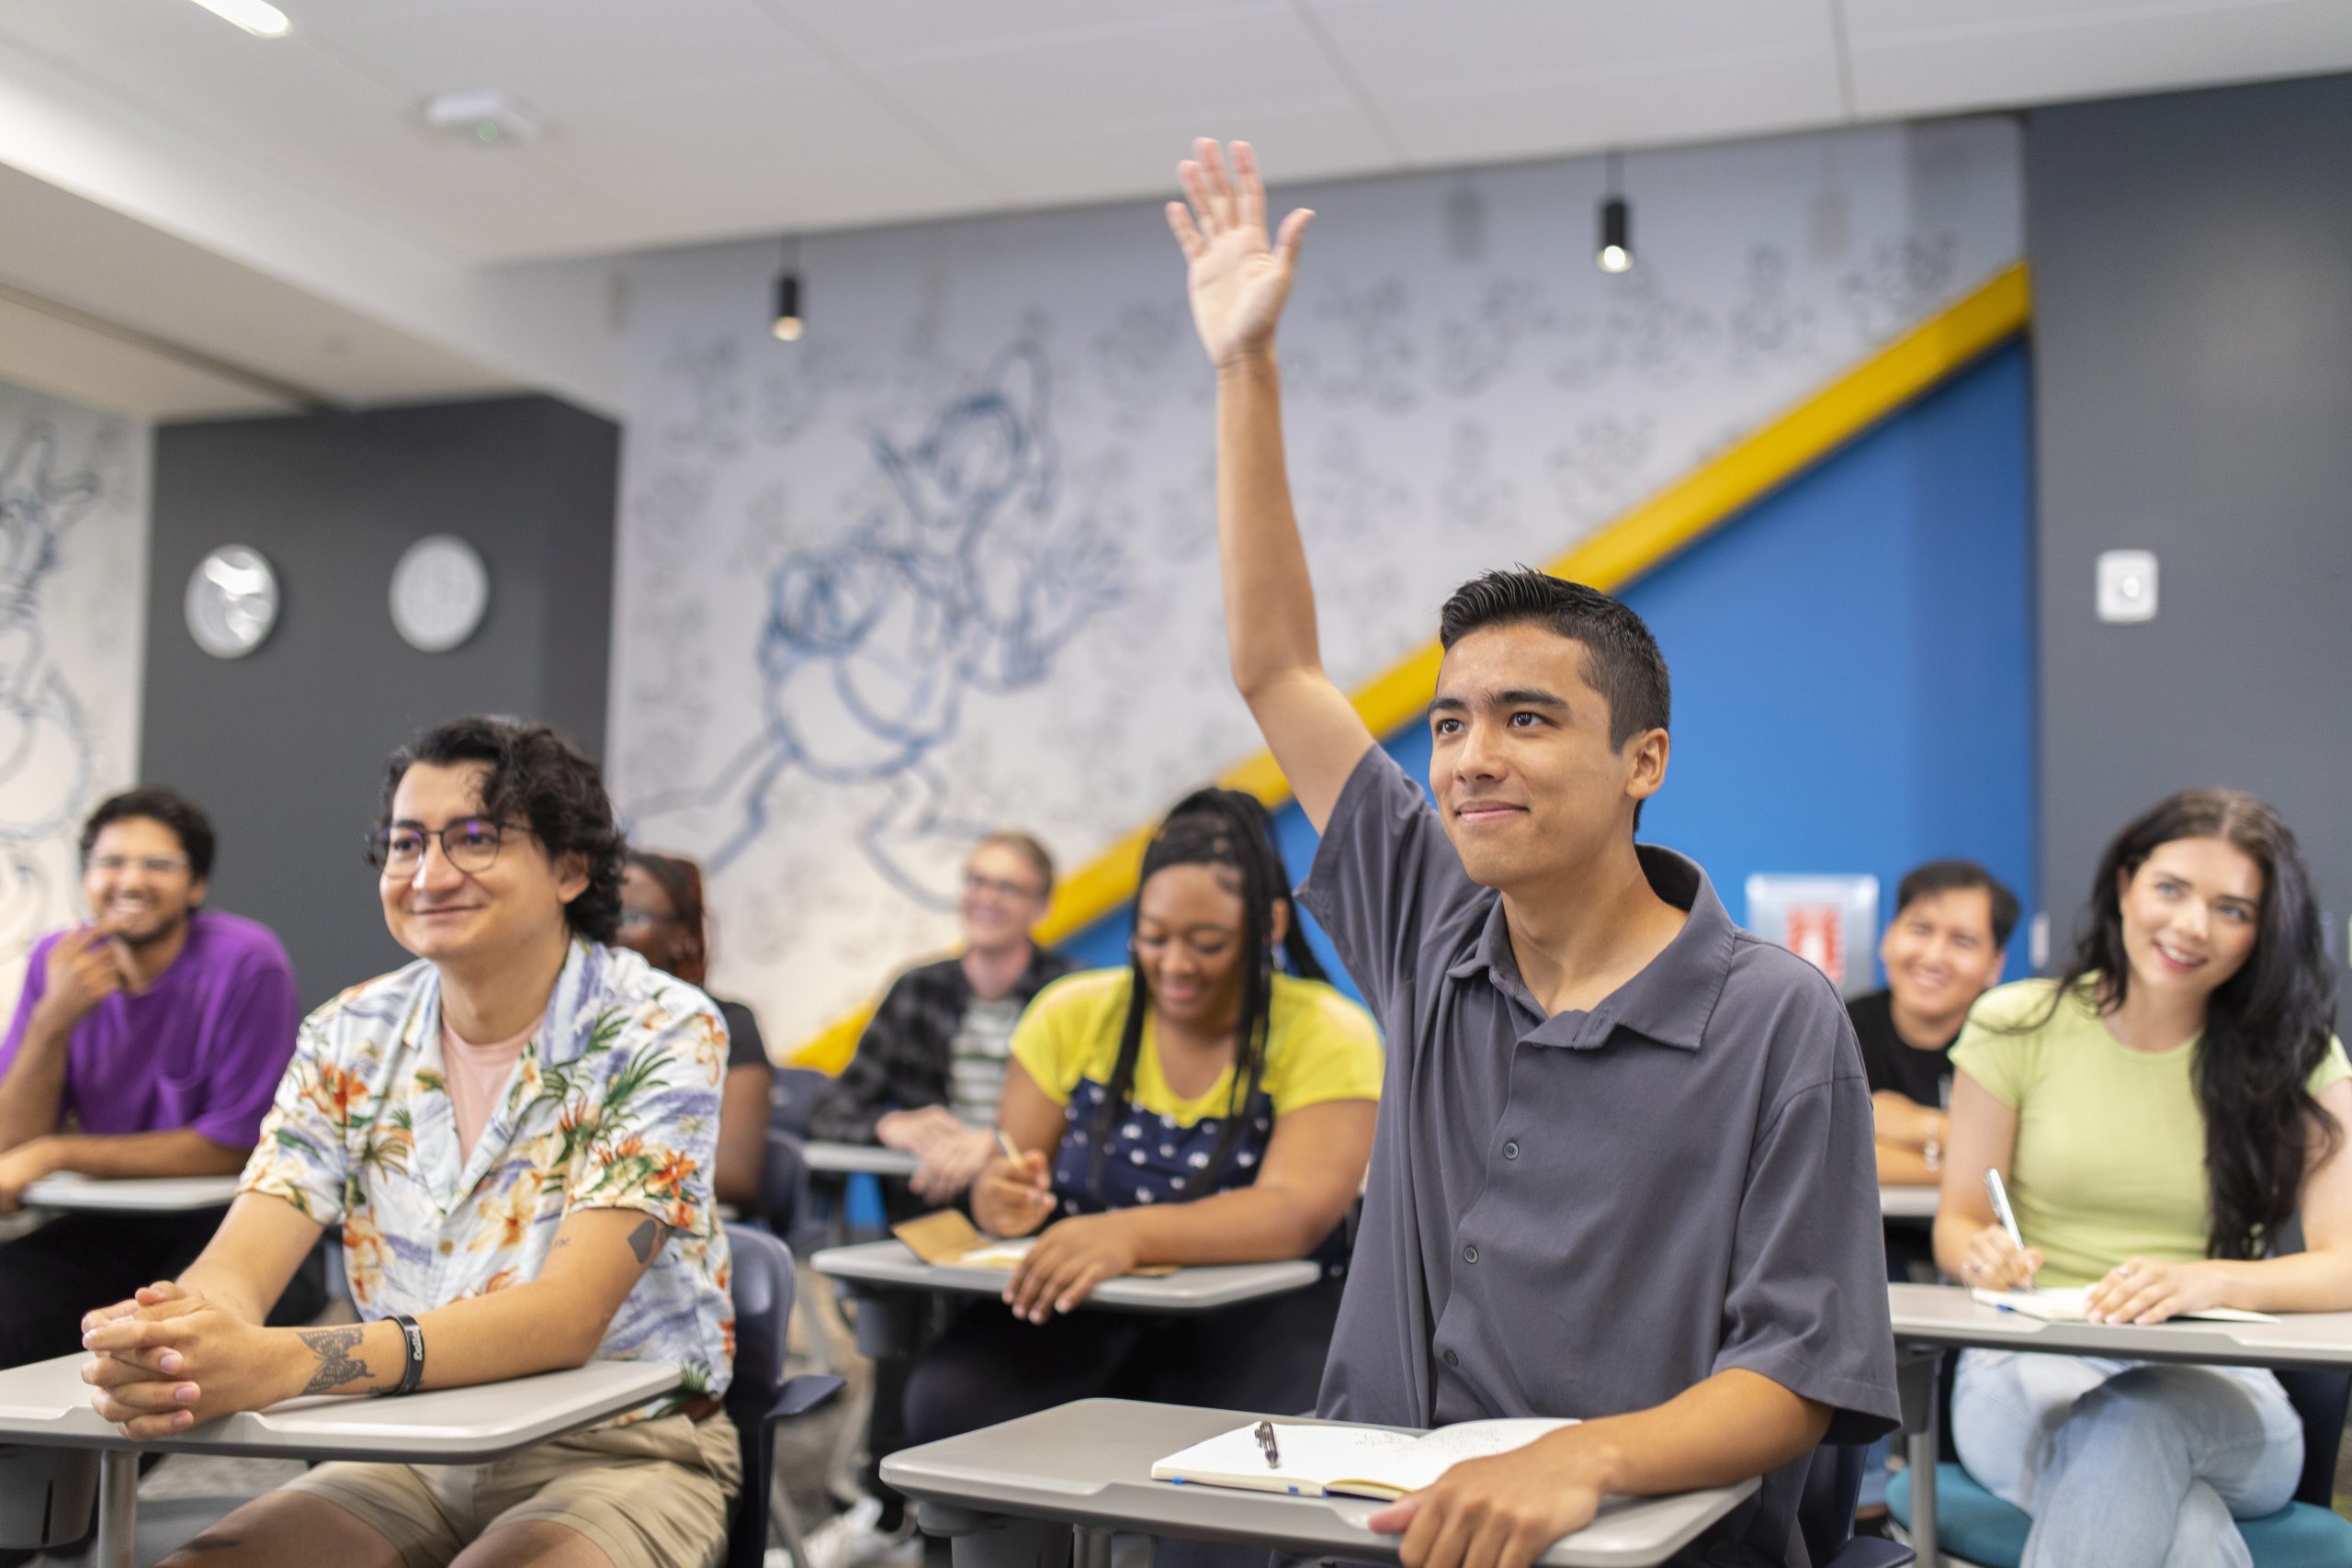 Student raising their hand in a classroom